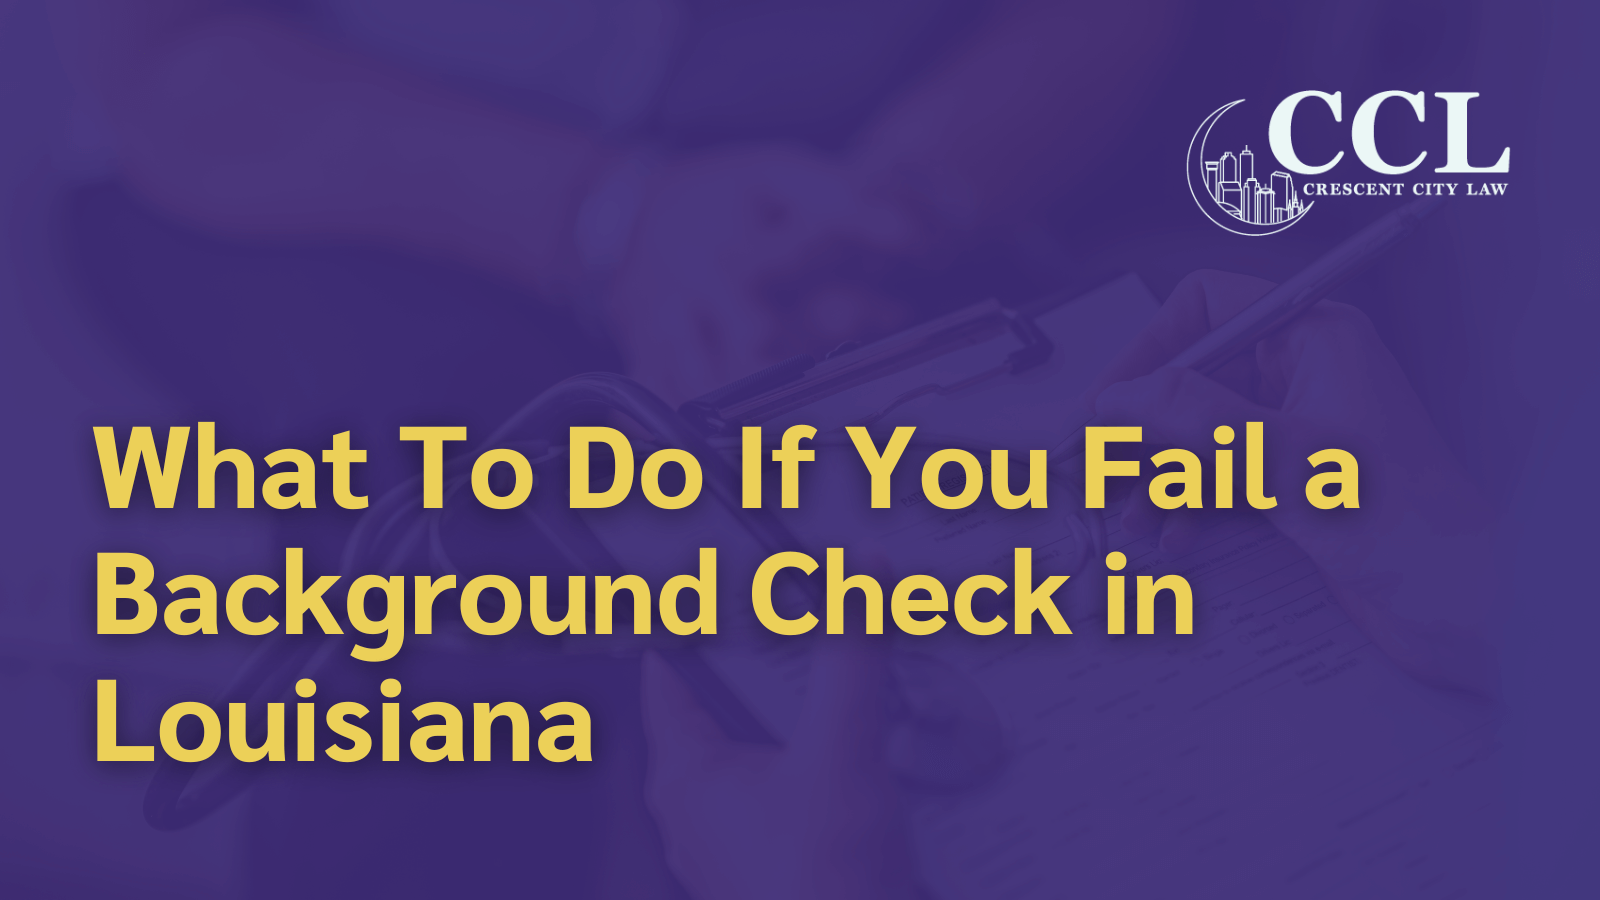 What To Do If You Fail a Background Check in Louisiana - crescent city law firm - new orleans la